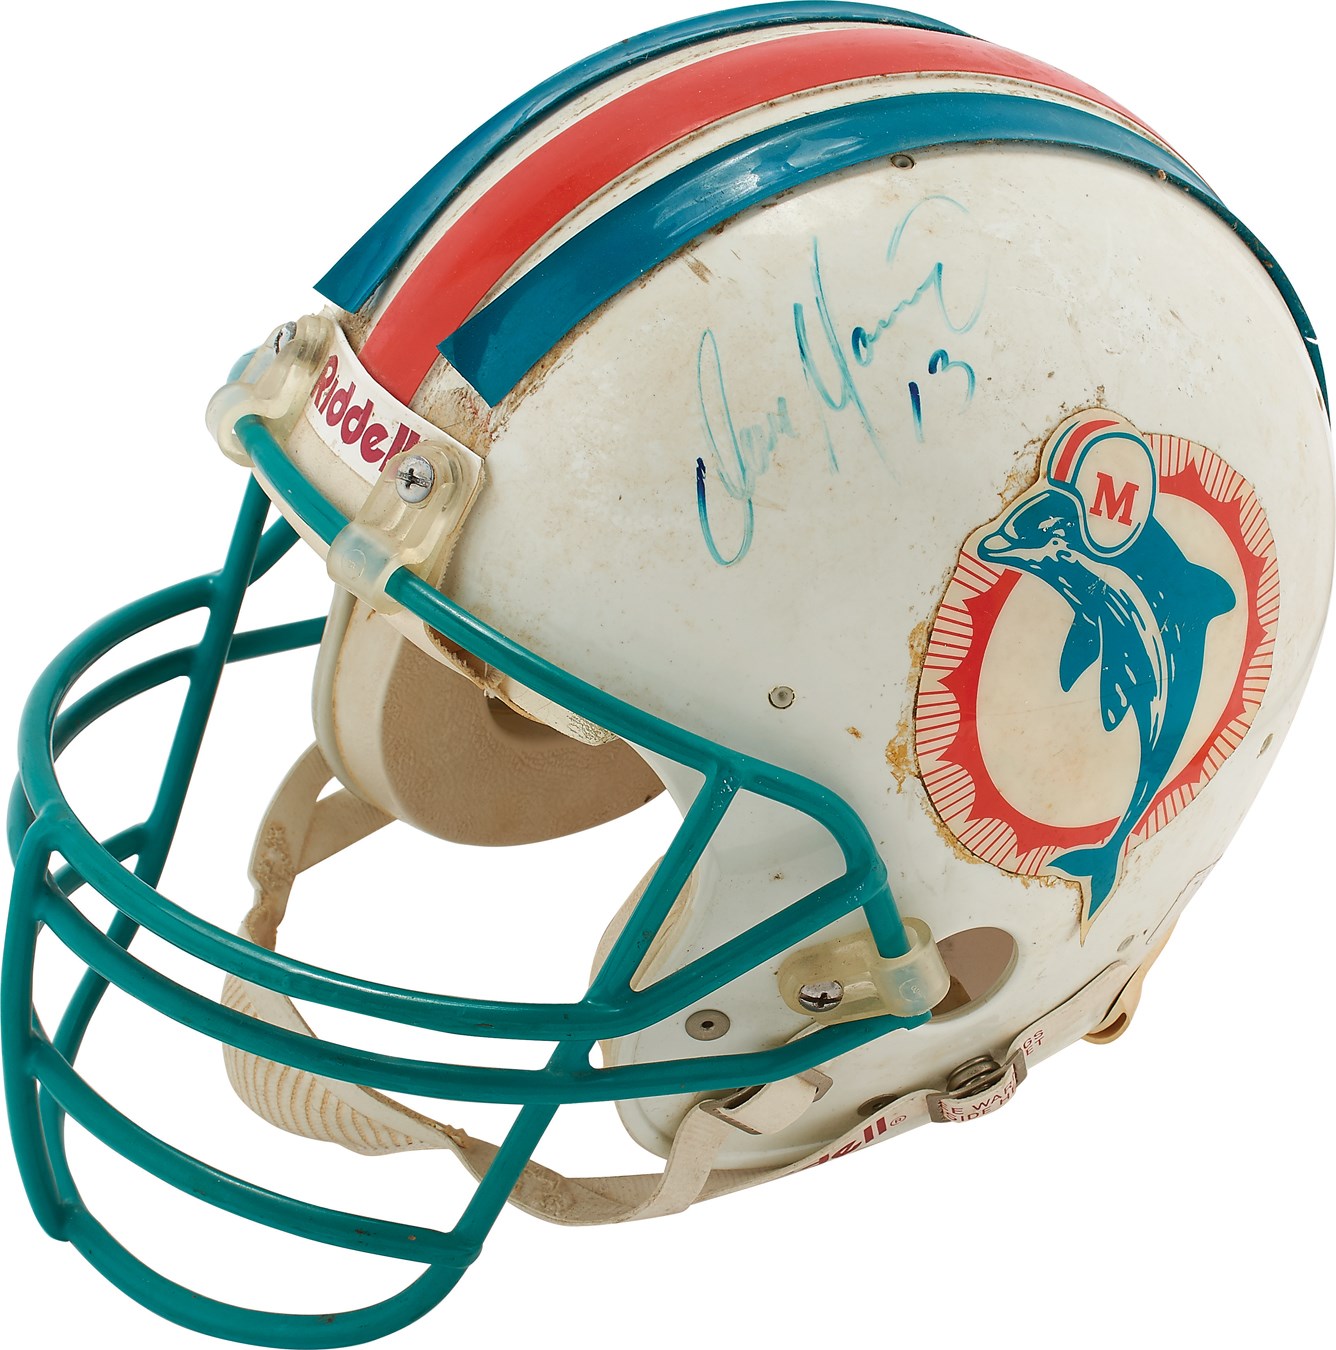 Football - 1984-86 Miami Dolphins Game Used Helmet Vintage-Signed by Dan Marino